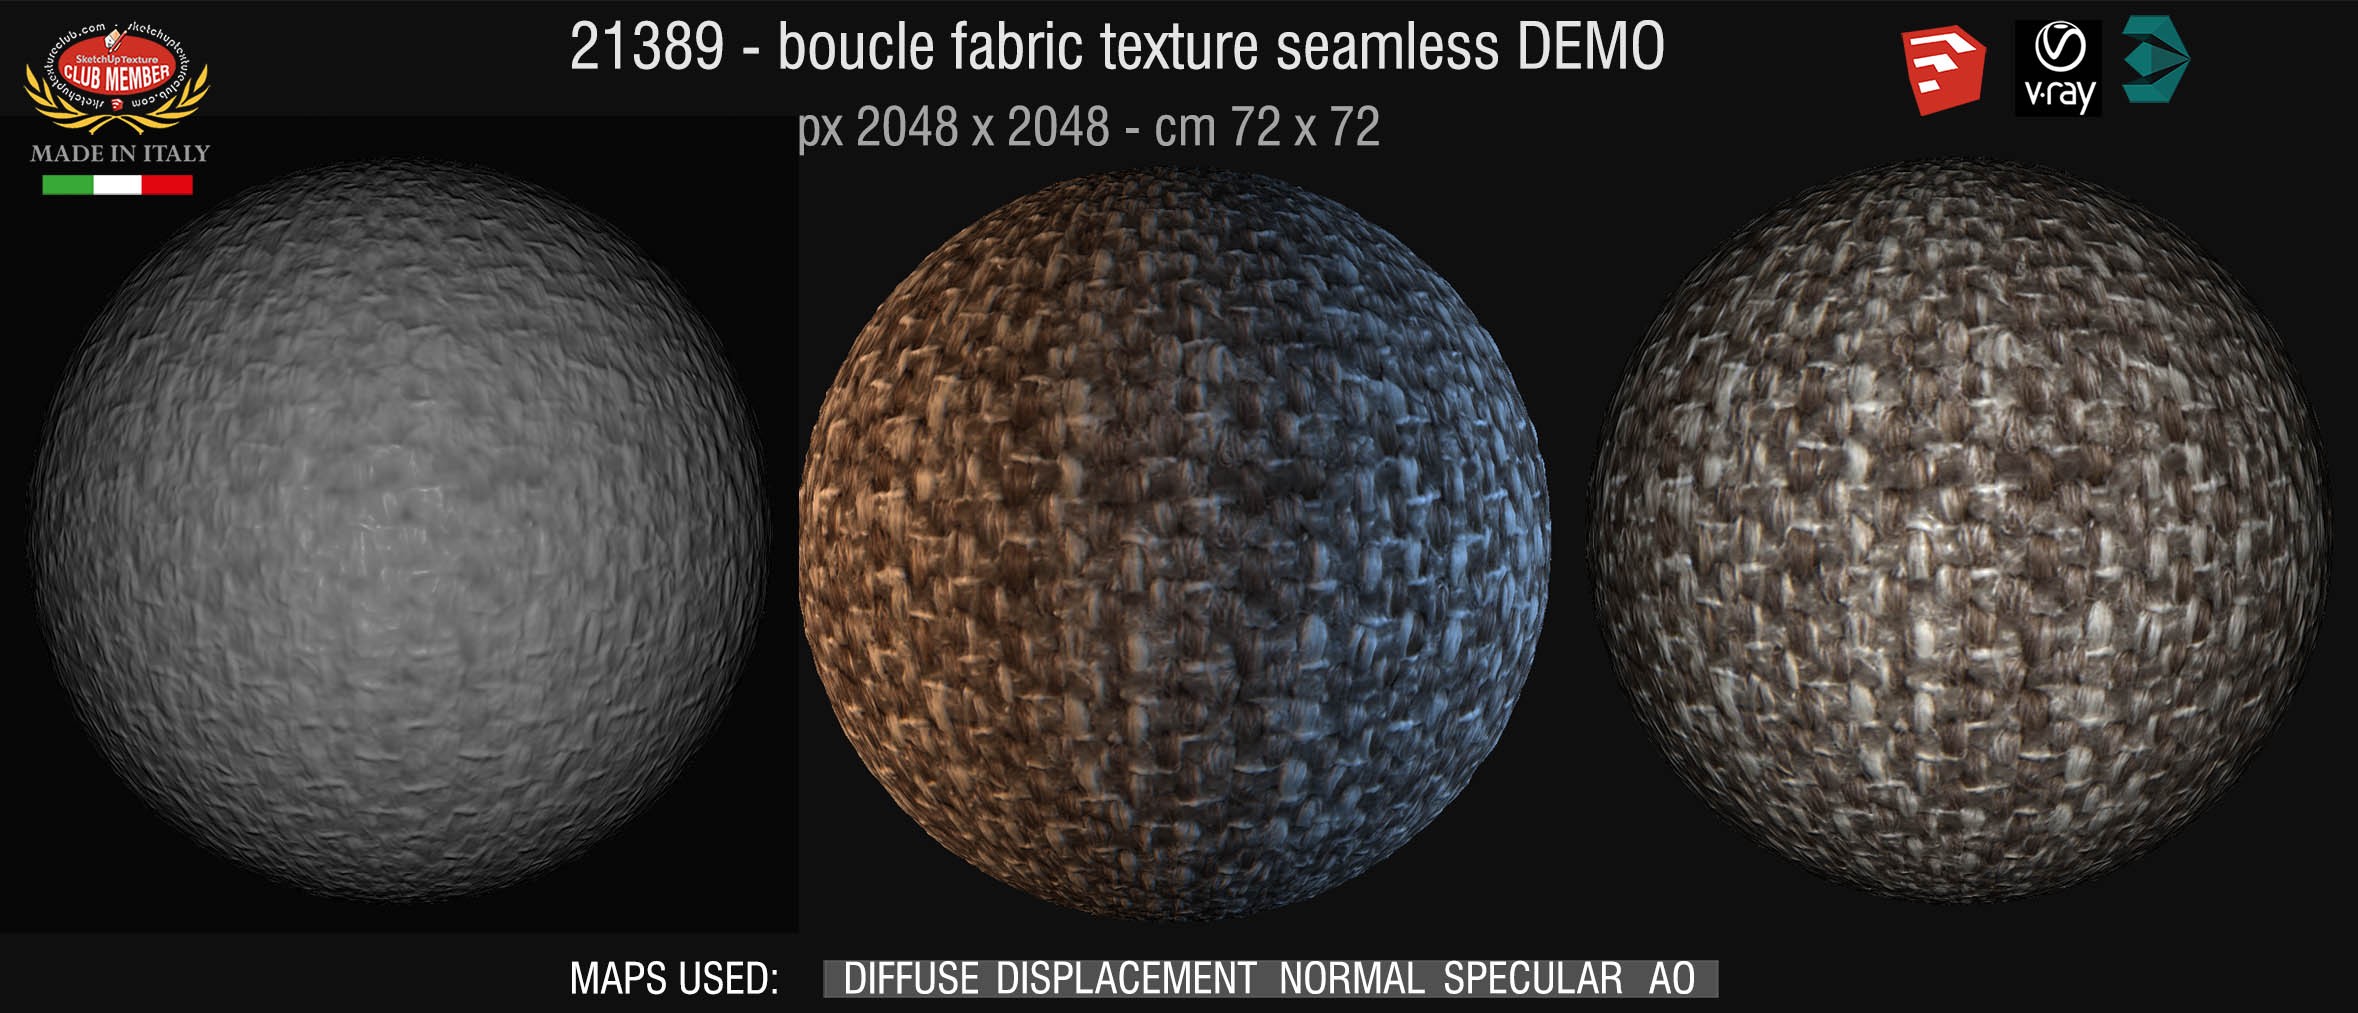 21389 boucle fabric texture-seamless + maps DEMO